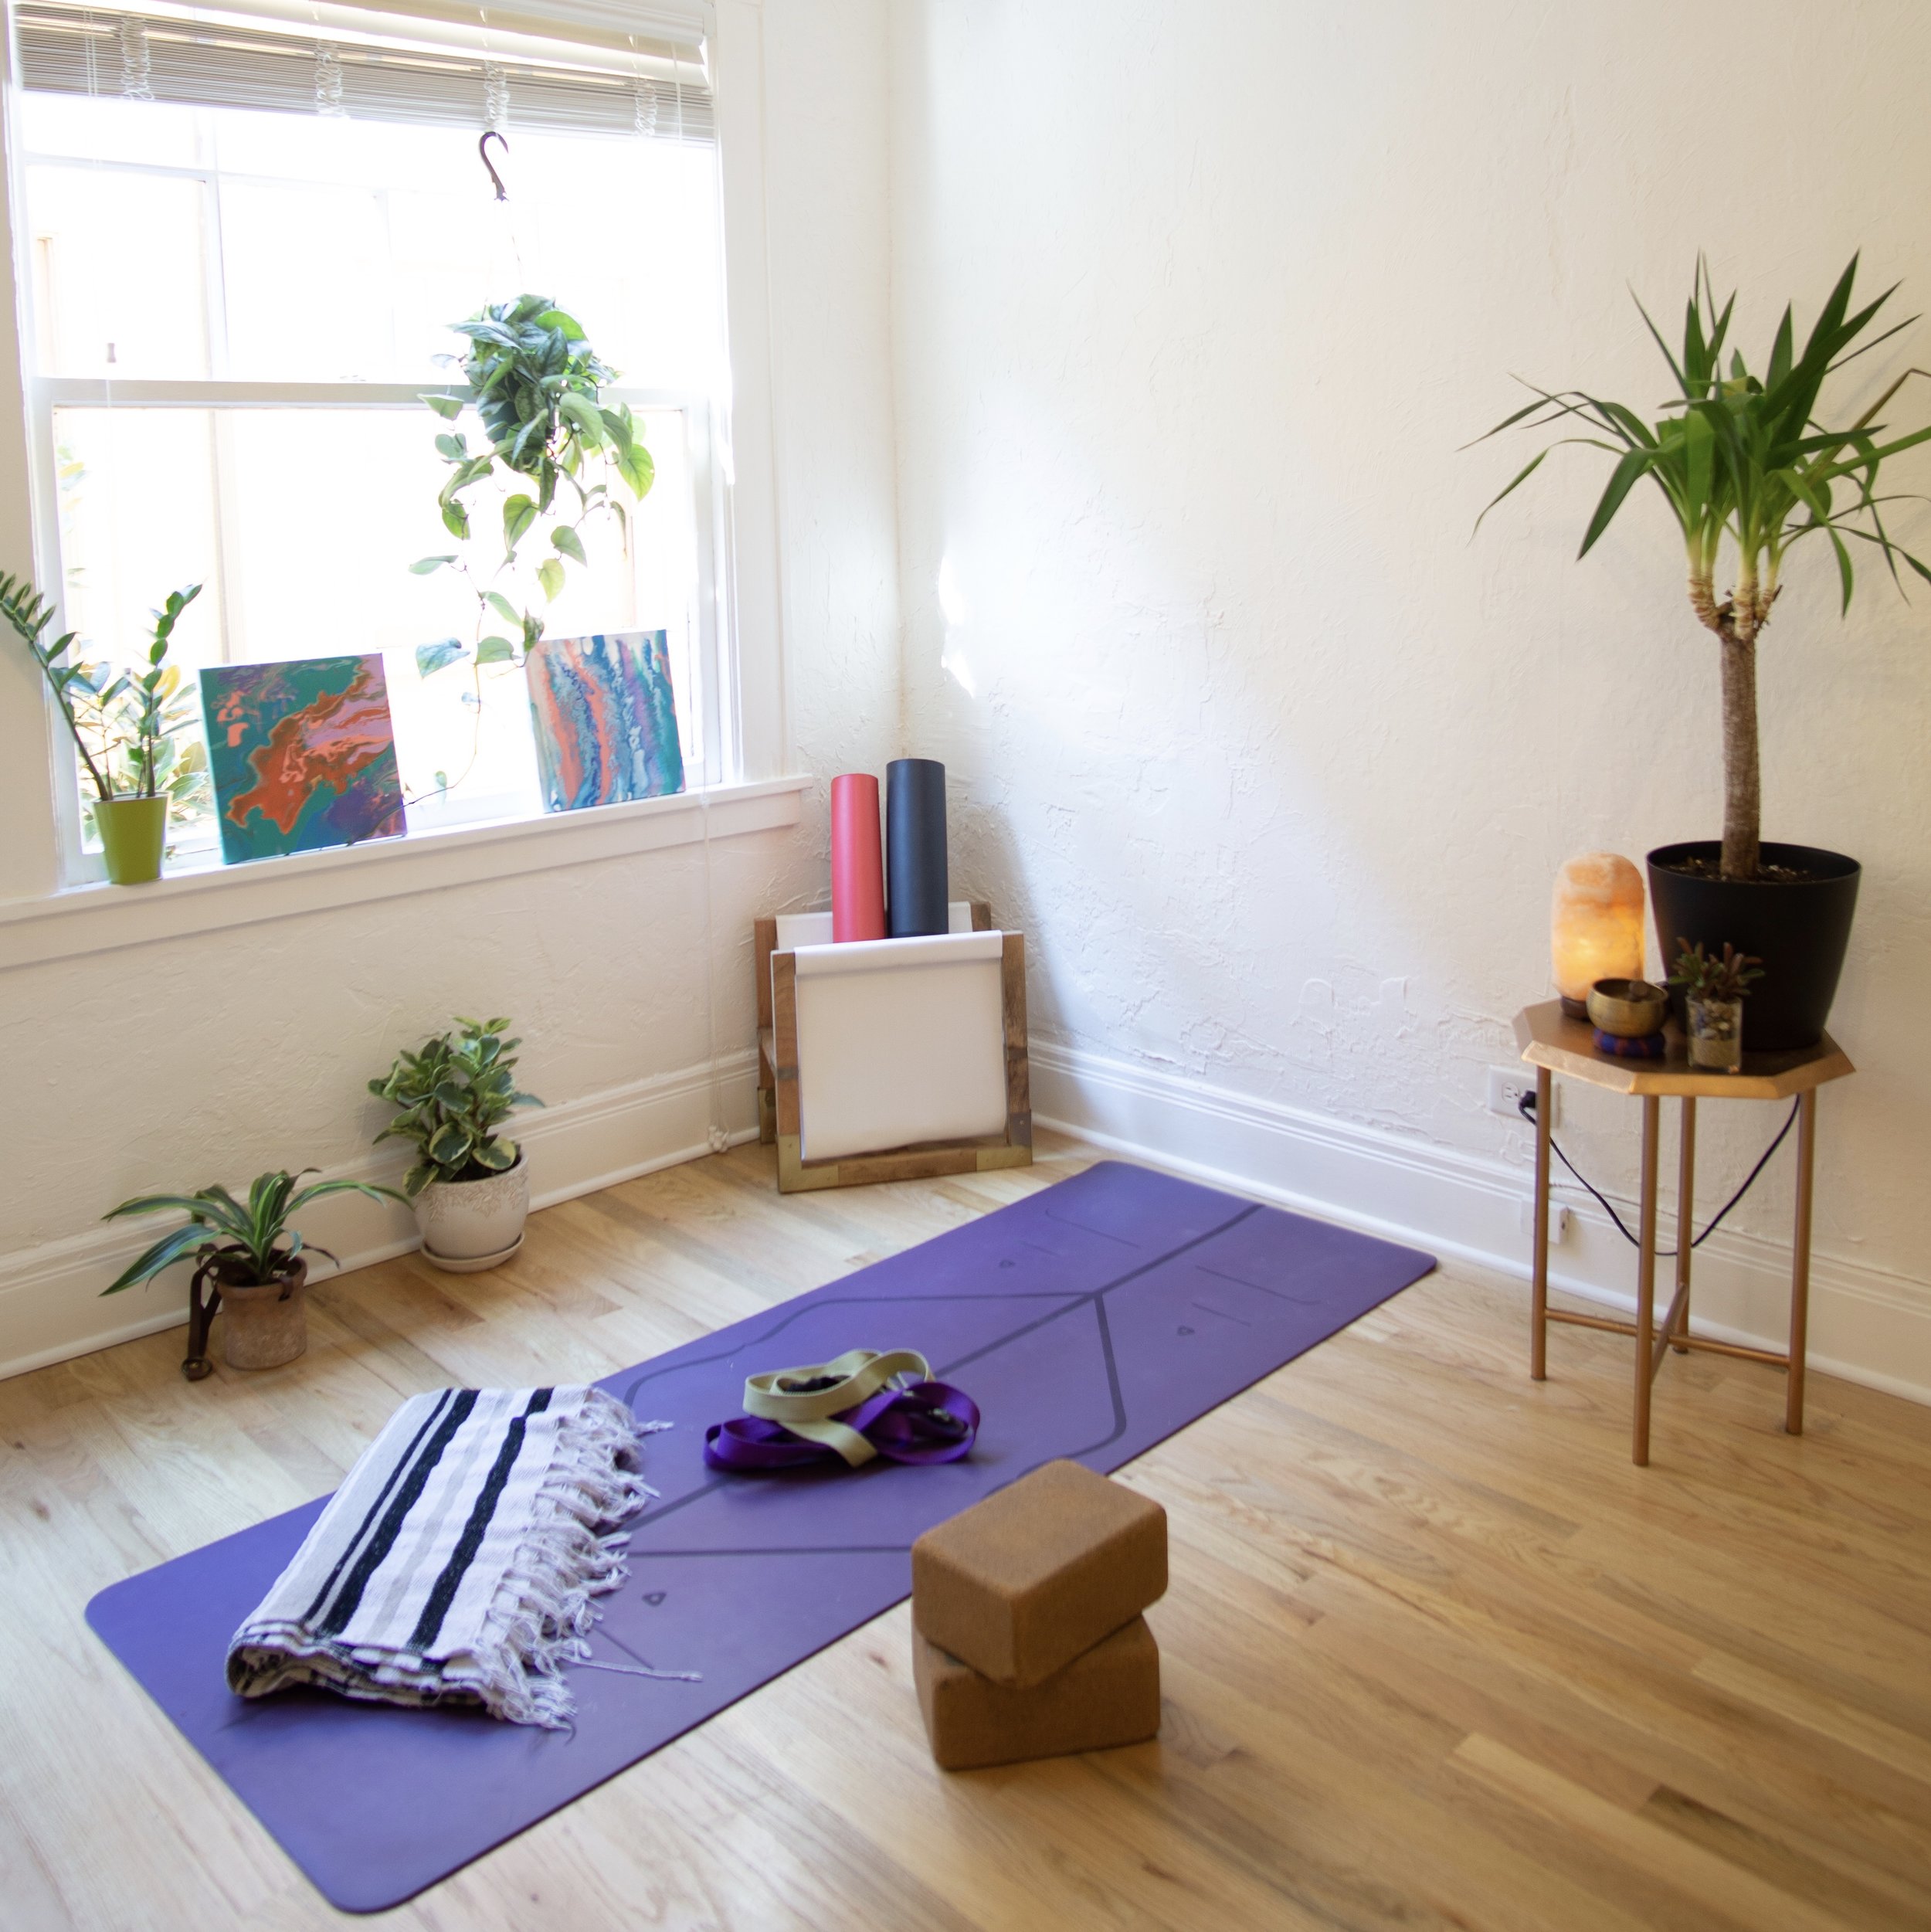 5 Steps To Creating A Home Yoga Space 